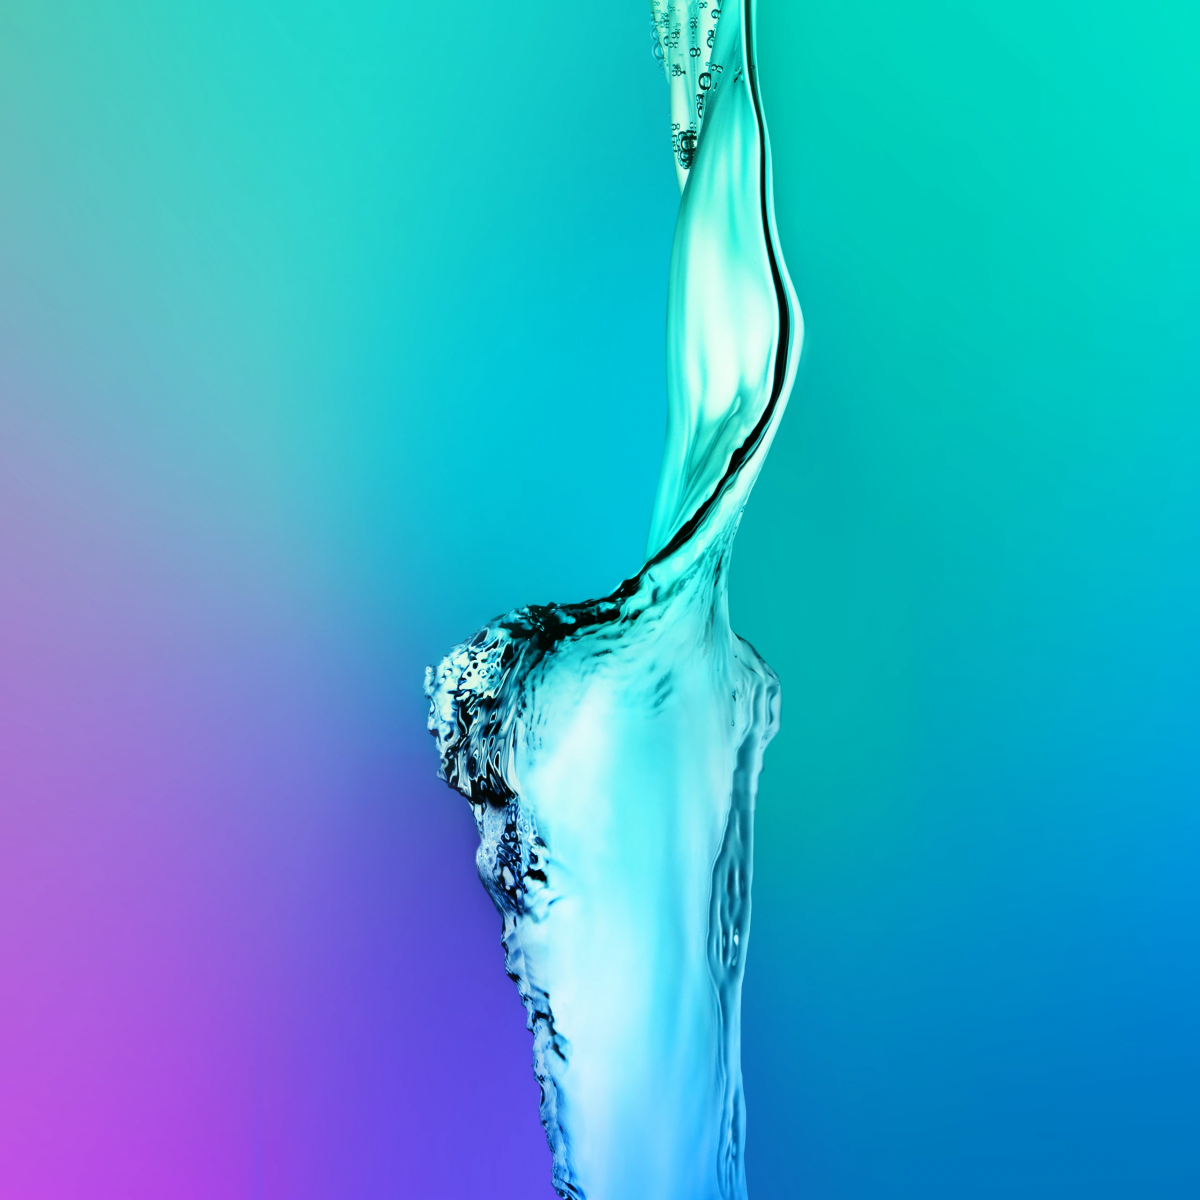 Download 6 Samsung Galaxy Note 5 wallpapers here